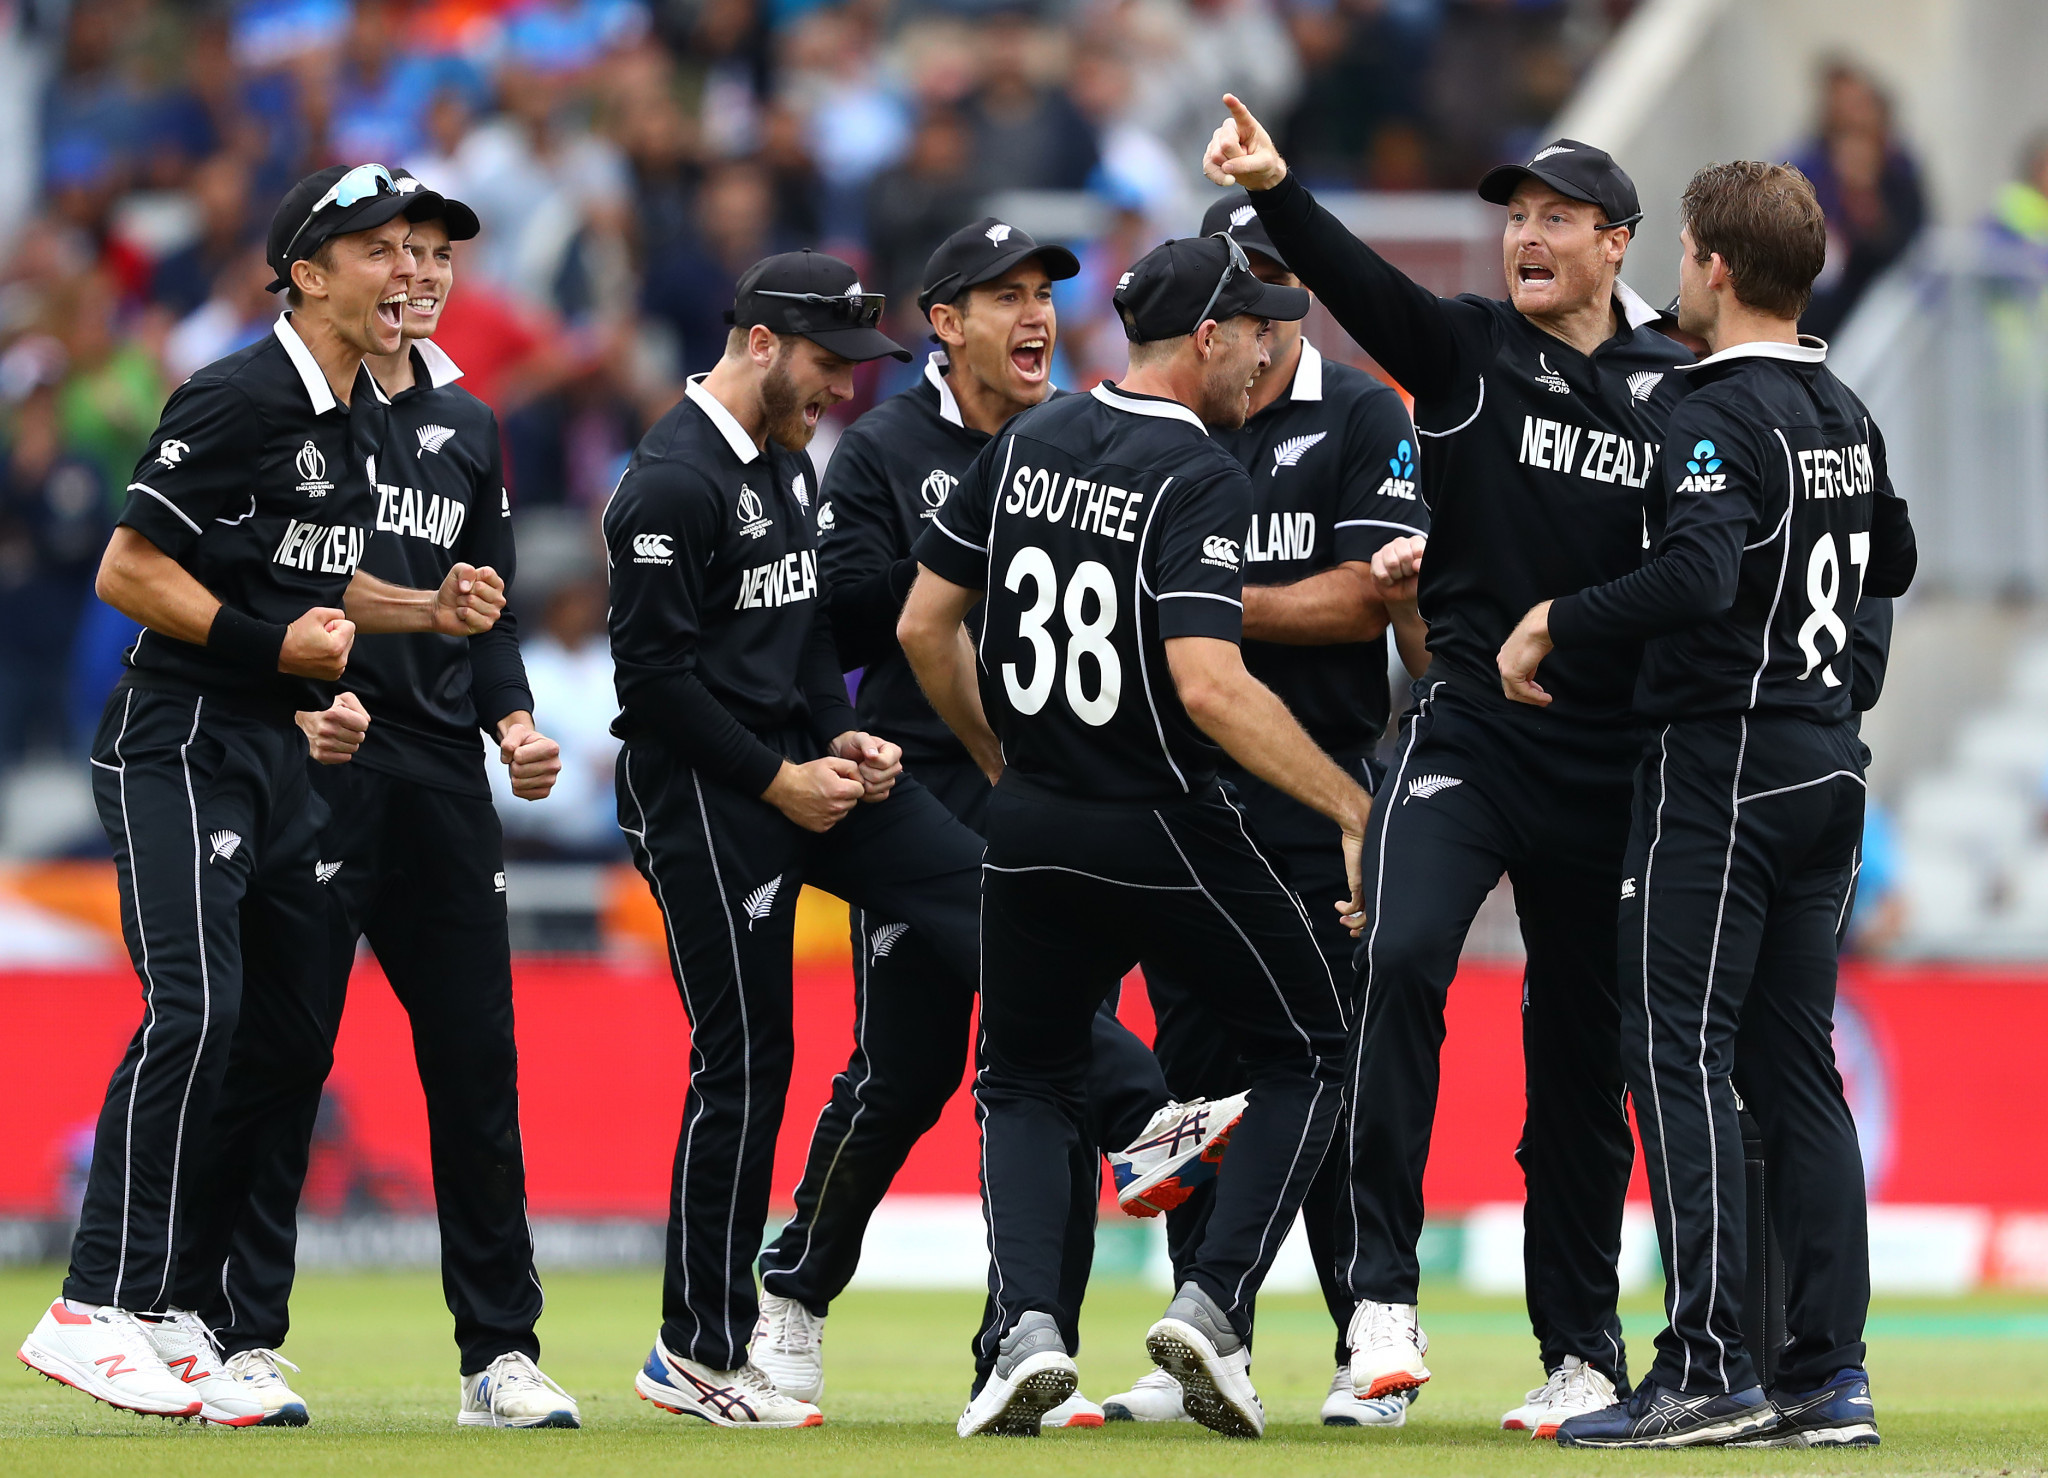 New Zealand reached the final of the ICC Cricket World Cup as they survived a late rally from India's middle-order ©Getty Images